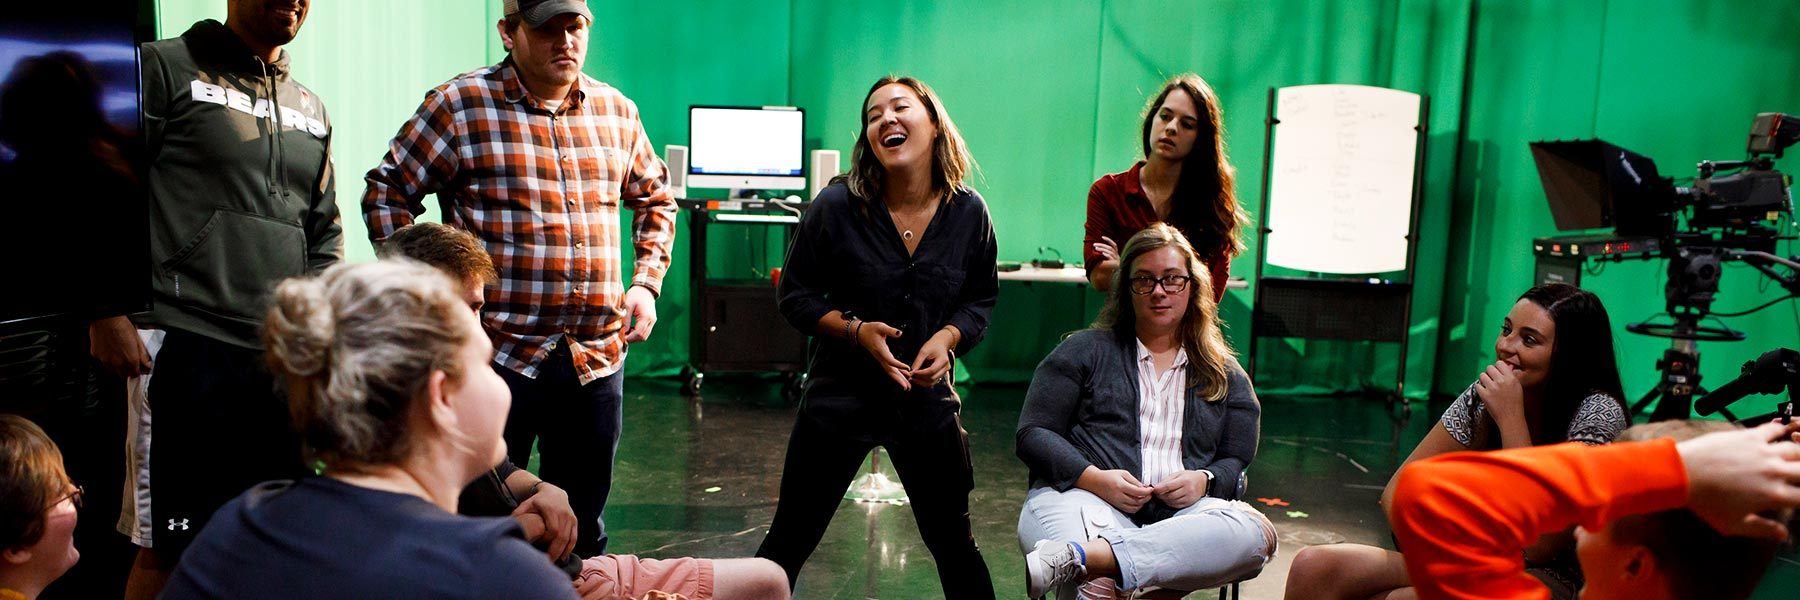 A group of students chat in a circle in a TV studio with a green screen.